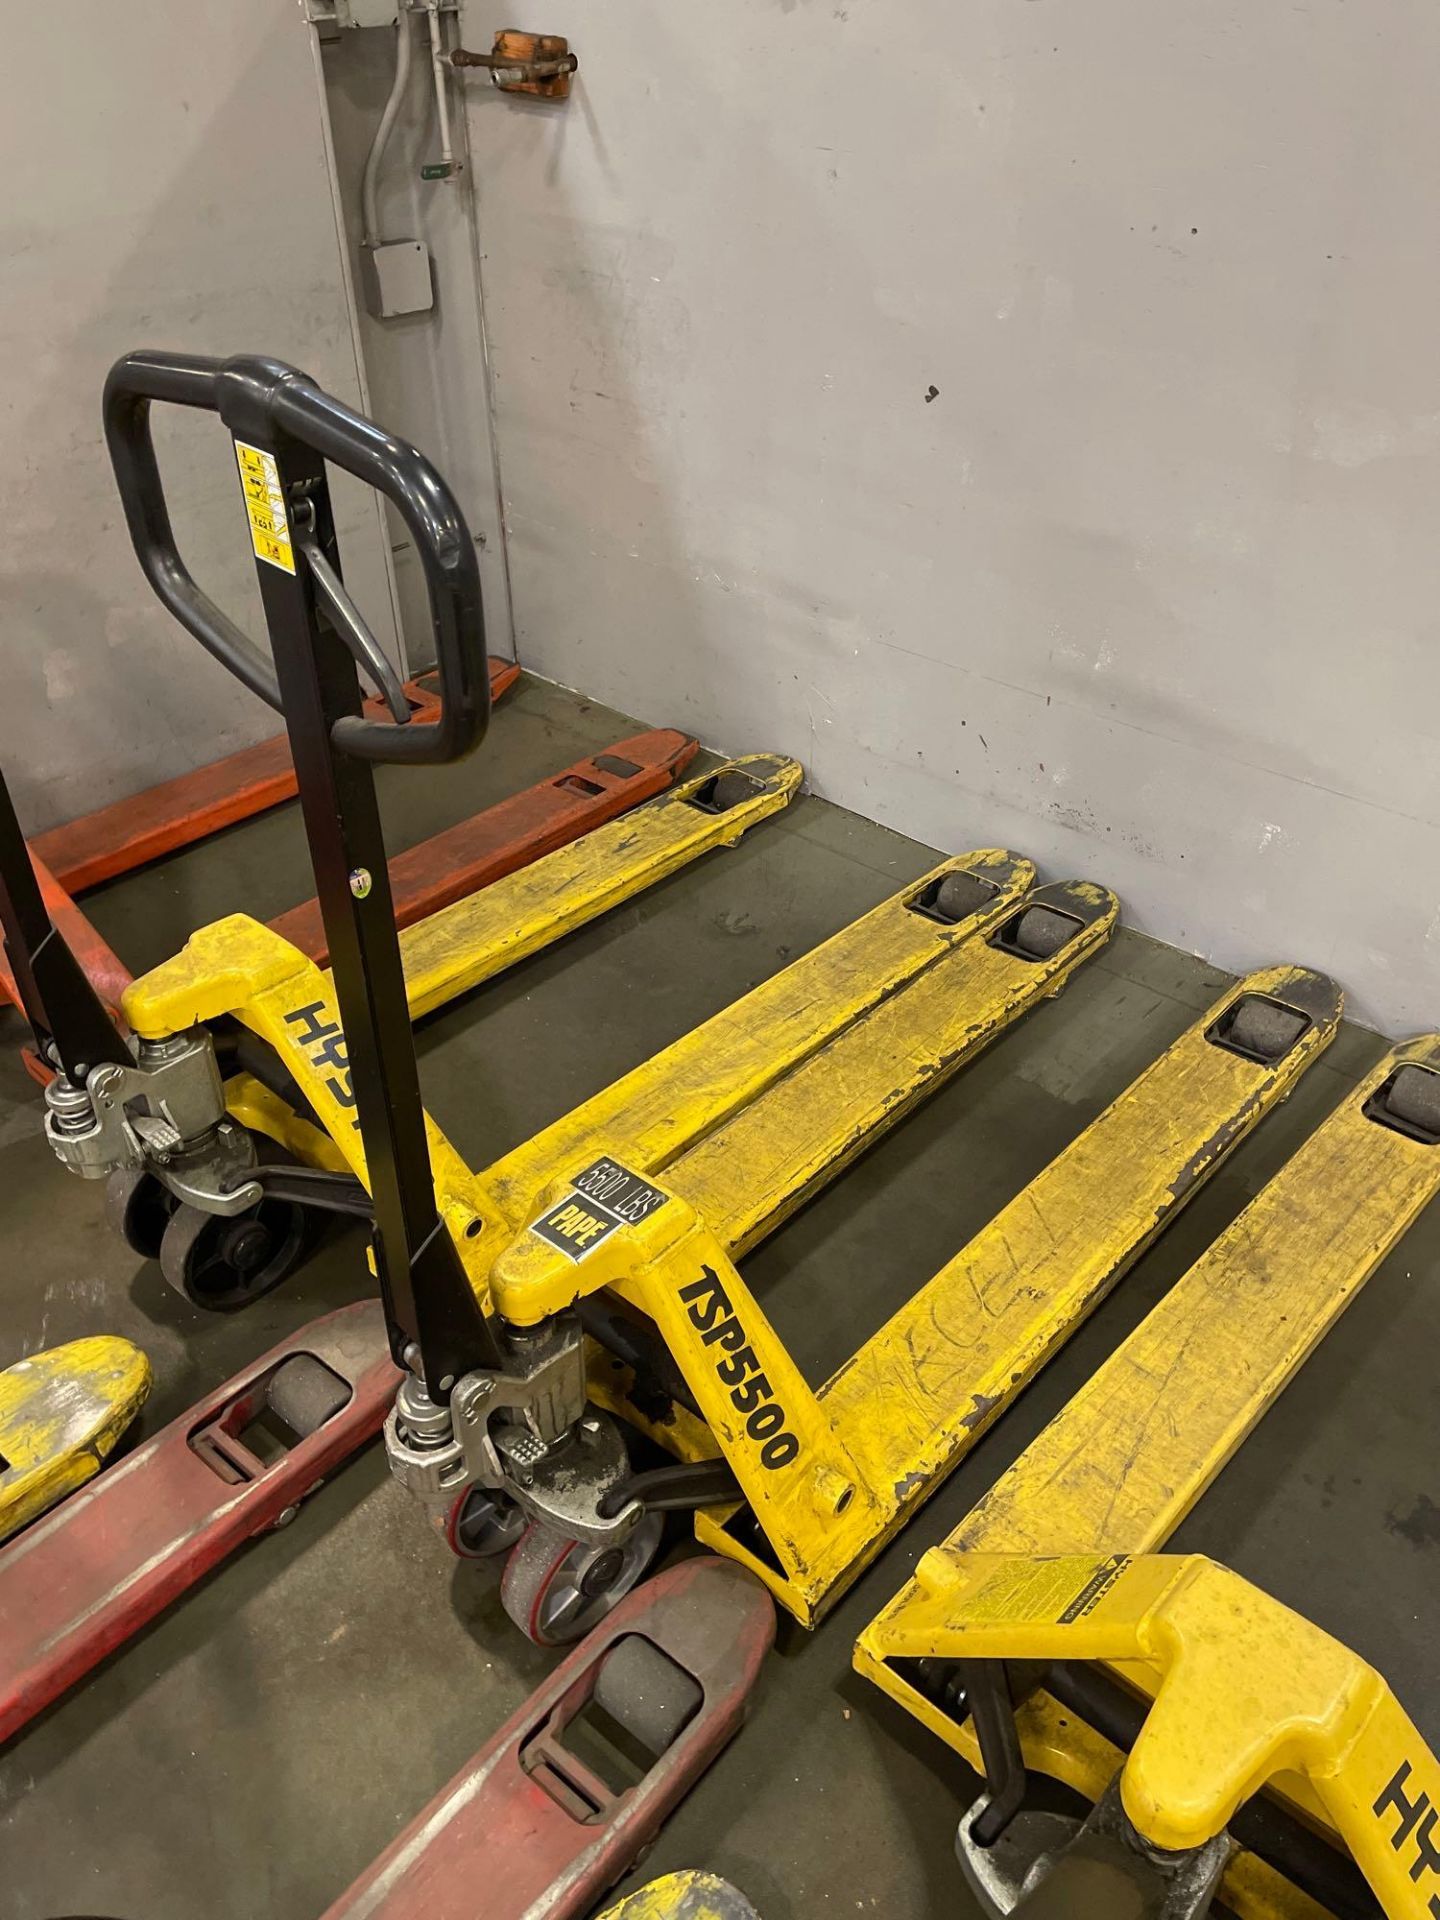 Lot of 2 Pallet Jacks: (1) Silver State, max. 5,500 lbs., (1) Hyster, max. 5,500 lbs. - Image 3 of 4